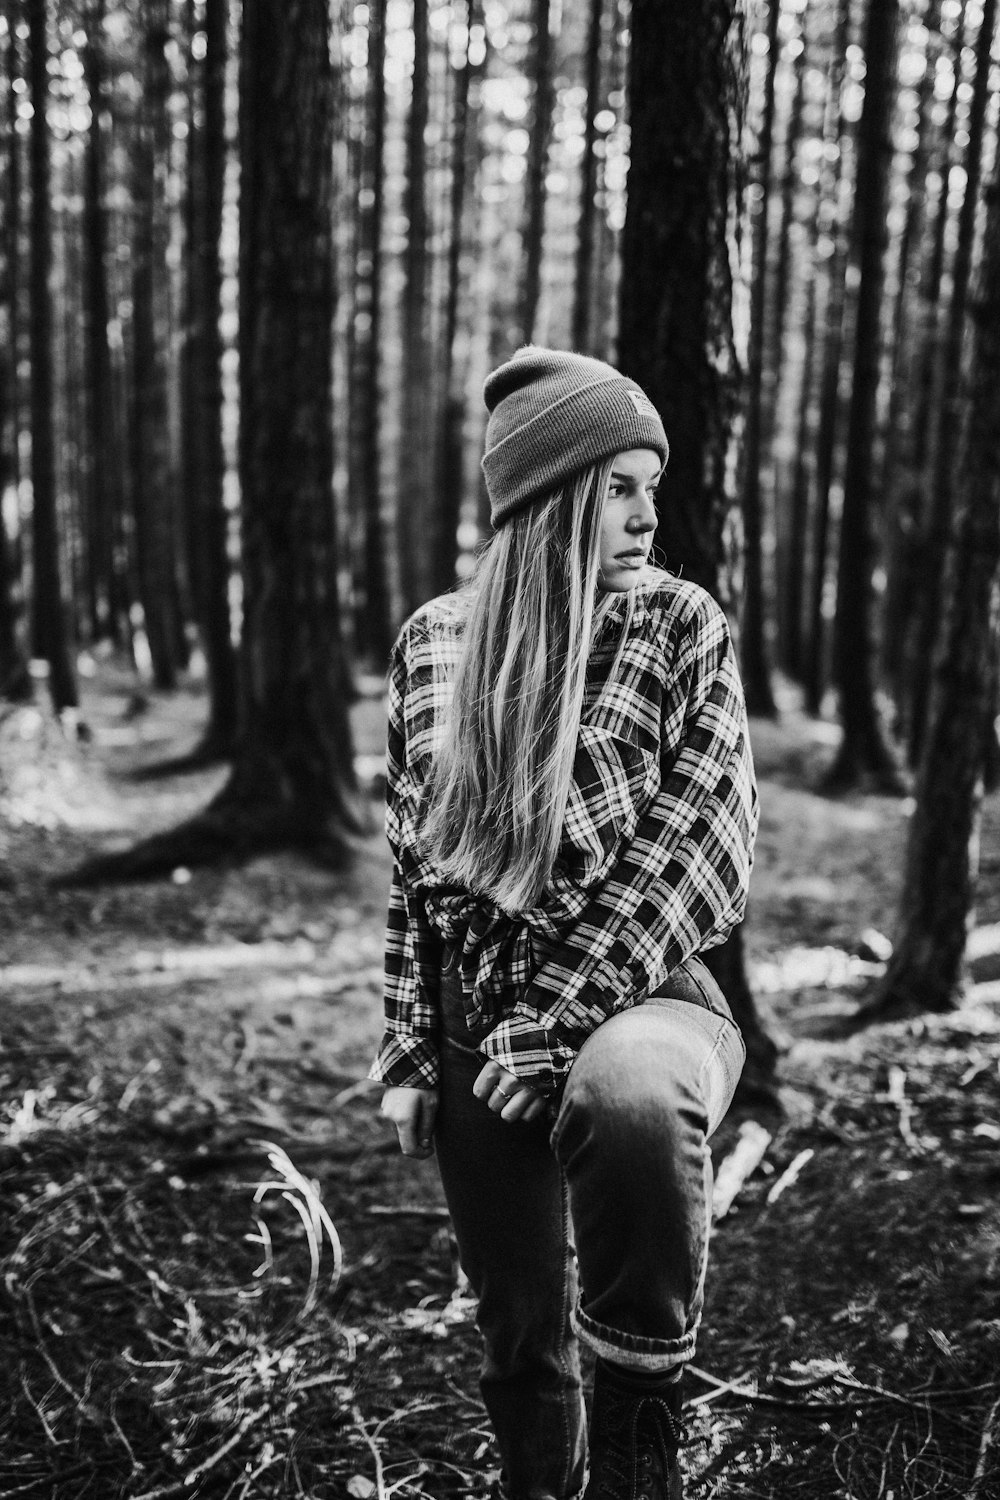 grayscale photo of woman in plaid shirt and denim jeans sitting on ground